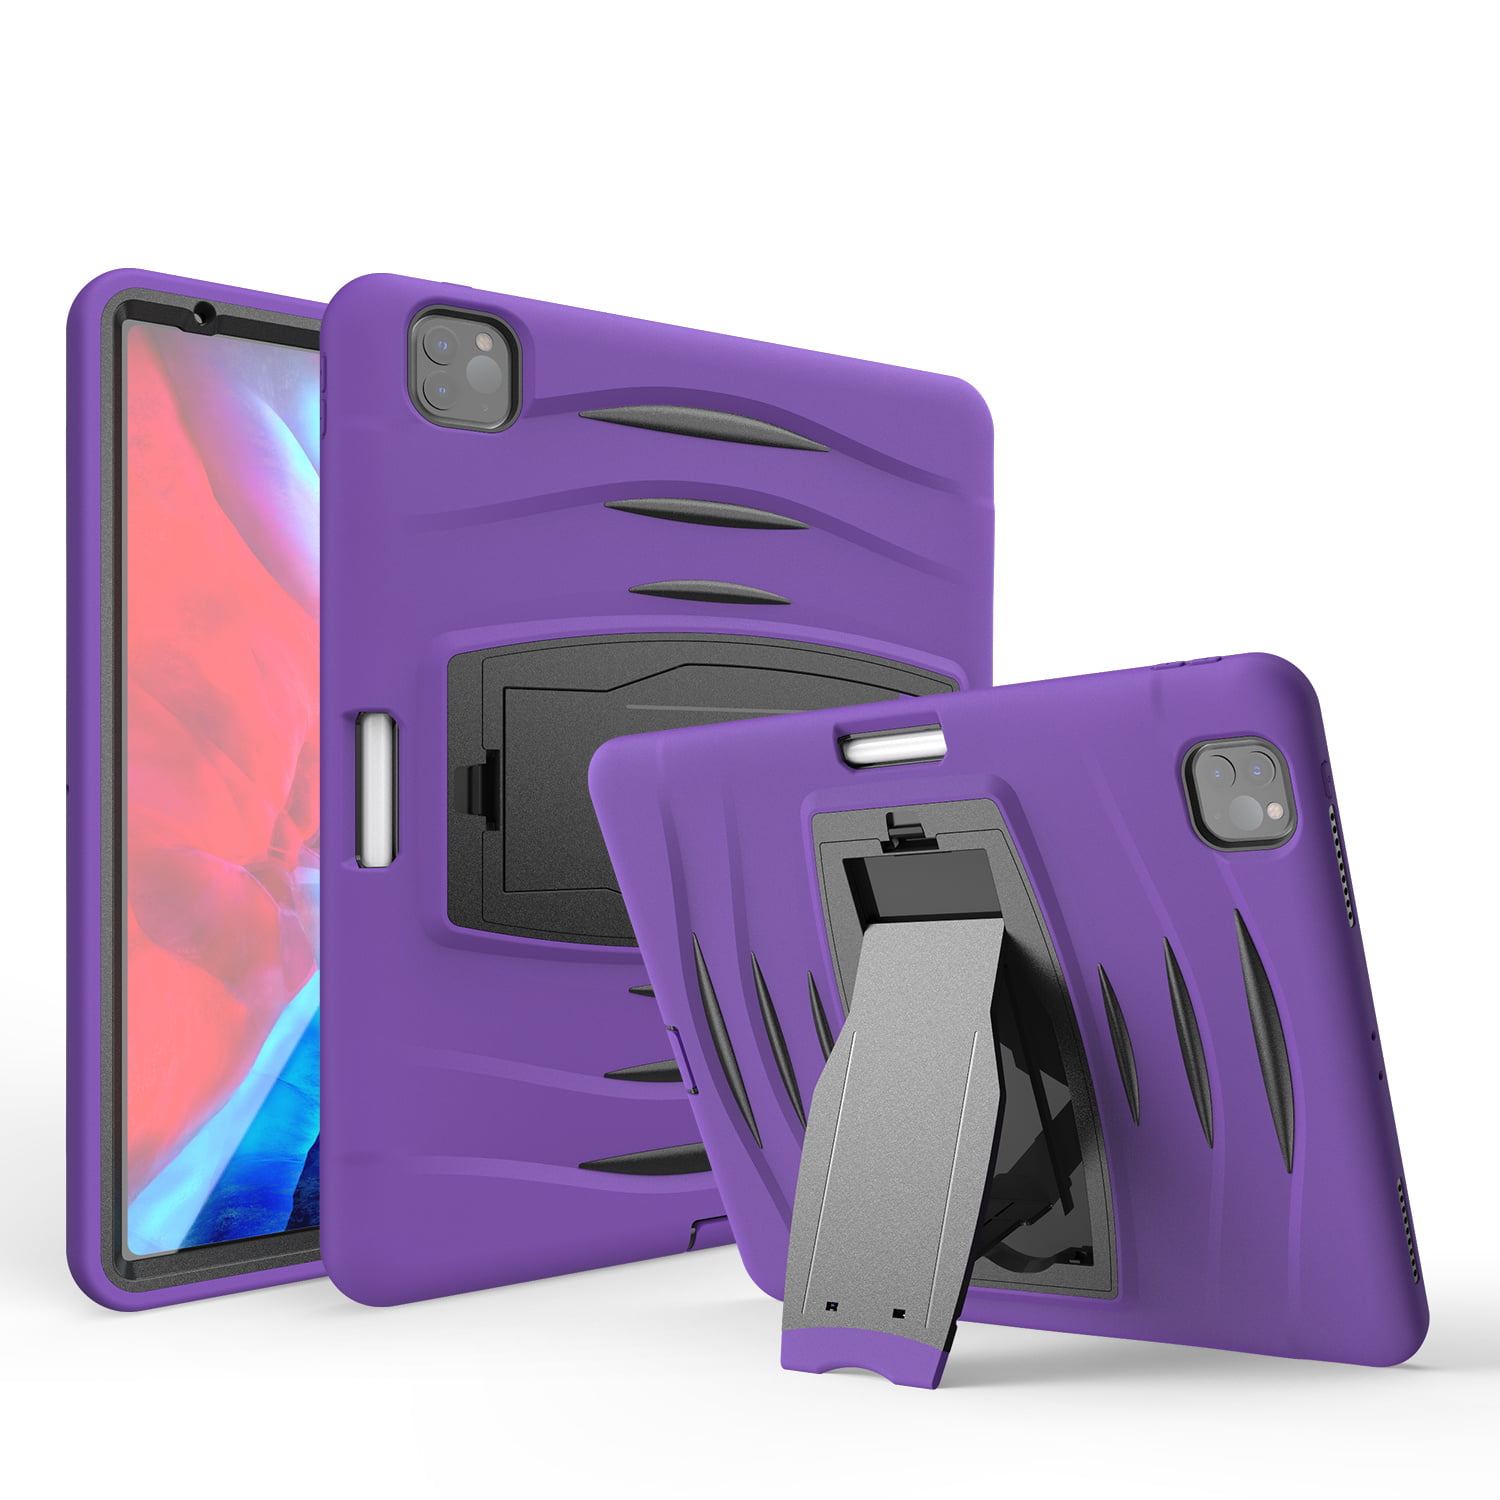 Allytech Shockproof Case for Apple iPad Pro 12.9 4th Gen 2020/ 3rd Gen  2018, Build-in Pencil Holder Heavy Duty Protection Bumper Case Cover for  Apple iPad Pro 12.9 2020/2018, Purple 